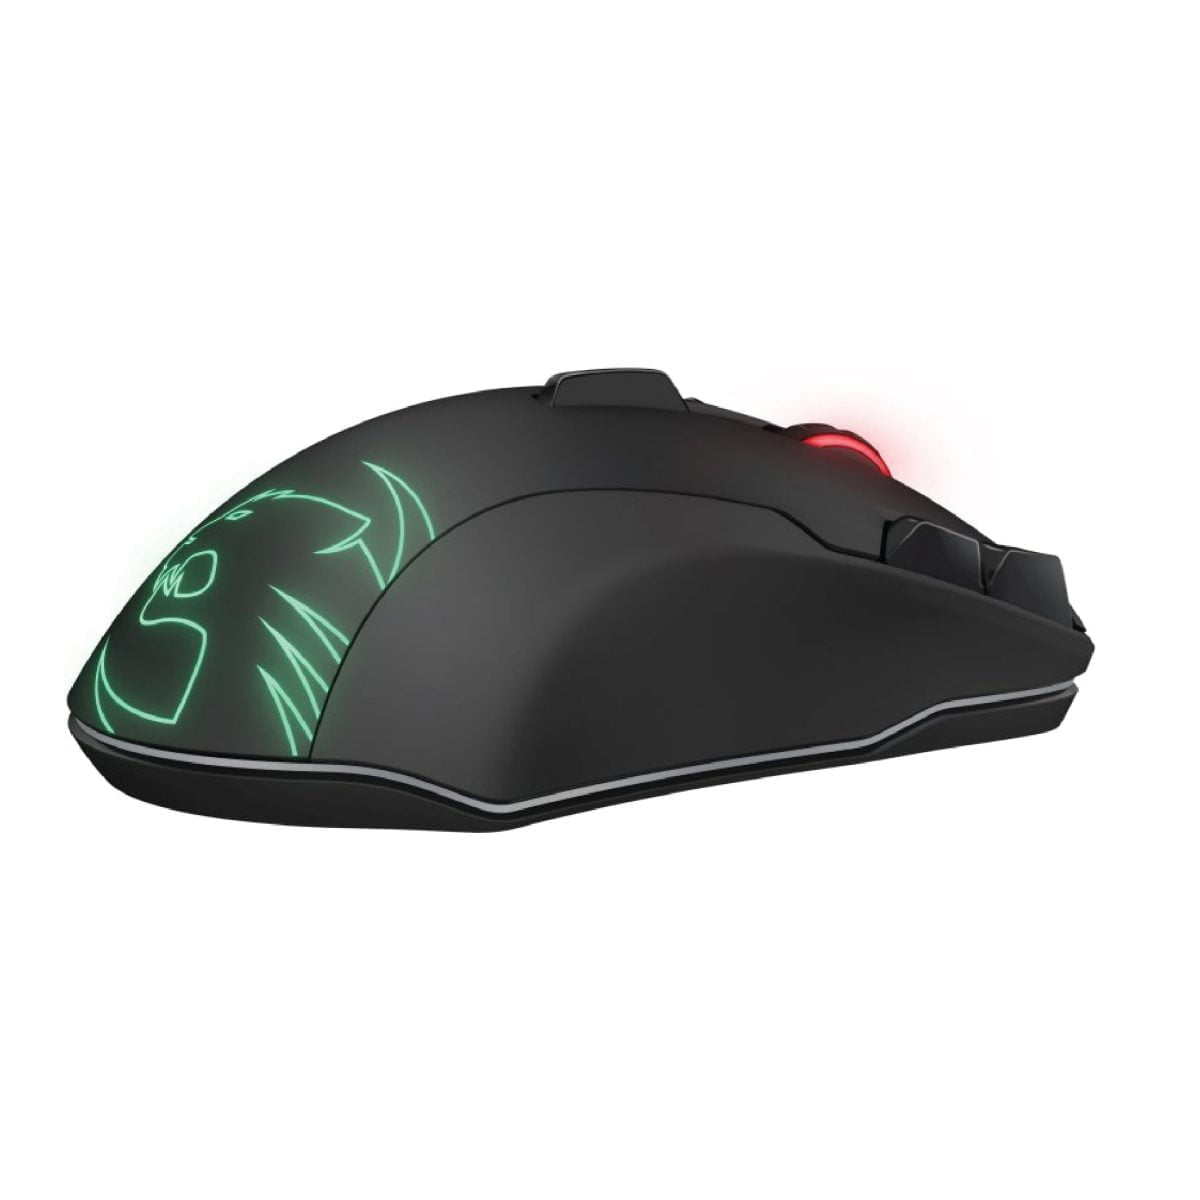 Mouse 13 Roccat &Lt;P Class=&Quot;Copytext&Quot;&Gt;&Lt;Span Style=&Quot;Color: #000000;&Quot;&Gt;What Sets The Leadr Apart From Its Competitors Is Its Pioneering Wireless Technology. Leadr Was Developed With A View To Providing Gamers With A Wireless Mouse That Performed Just As Well As A Wired One. With 1000Hz Polling And 2.4Ghz Data Transmission – Faster Than Usb – It Boasts Zero Lag And Virtually Latency, For Lightning-Fast Input. This Technology Is Complemented By The Pioneering Roccat® Owl-Eye Optical Sensor, Which Is Optimized For Wireless. Other Wireless Mice Make Sacrifices By Using Power-Saving Modes But Owl-Eye Uses Full Power All The Time, Bringing The Feeling Of Wired To Wireless.&Lt;/Span&Gt;&Lt;/P&Gt; &Lt;B&Gt;We Also Provide International Wholesale And Retail Shipping To All Gcc Countries: Saudi Arabia, Qatar, Oman, Kuwait, Bahrain. &Lt;/B&Gt; Roccat Leadr Wireless Gaming Mouse Roccat Leadr Wireless Gaming Mouse, Black